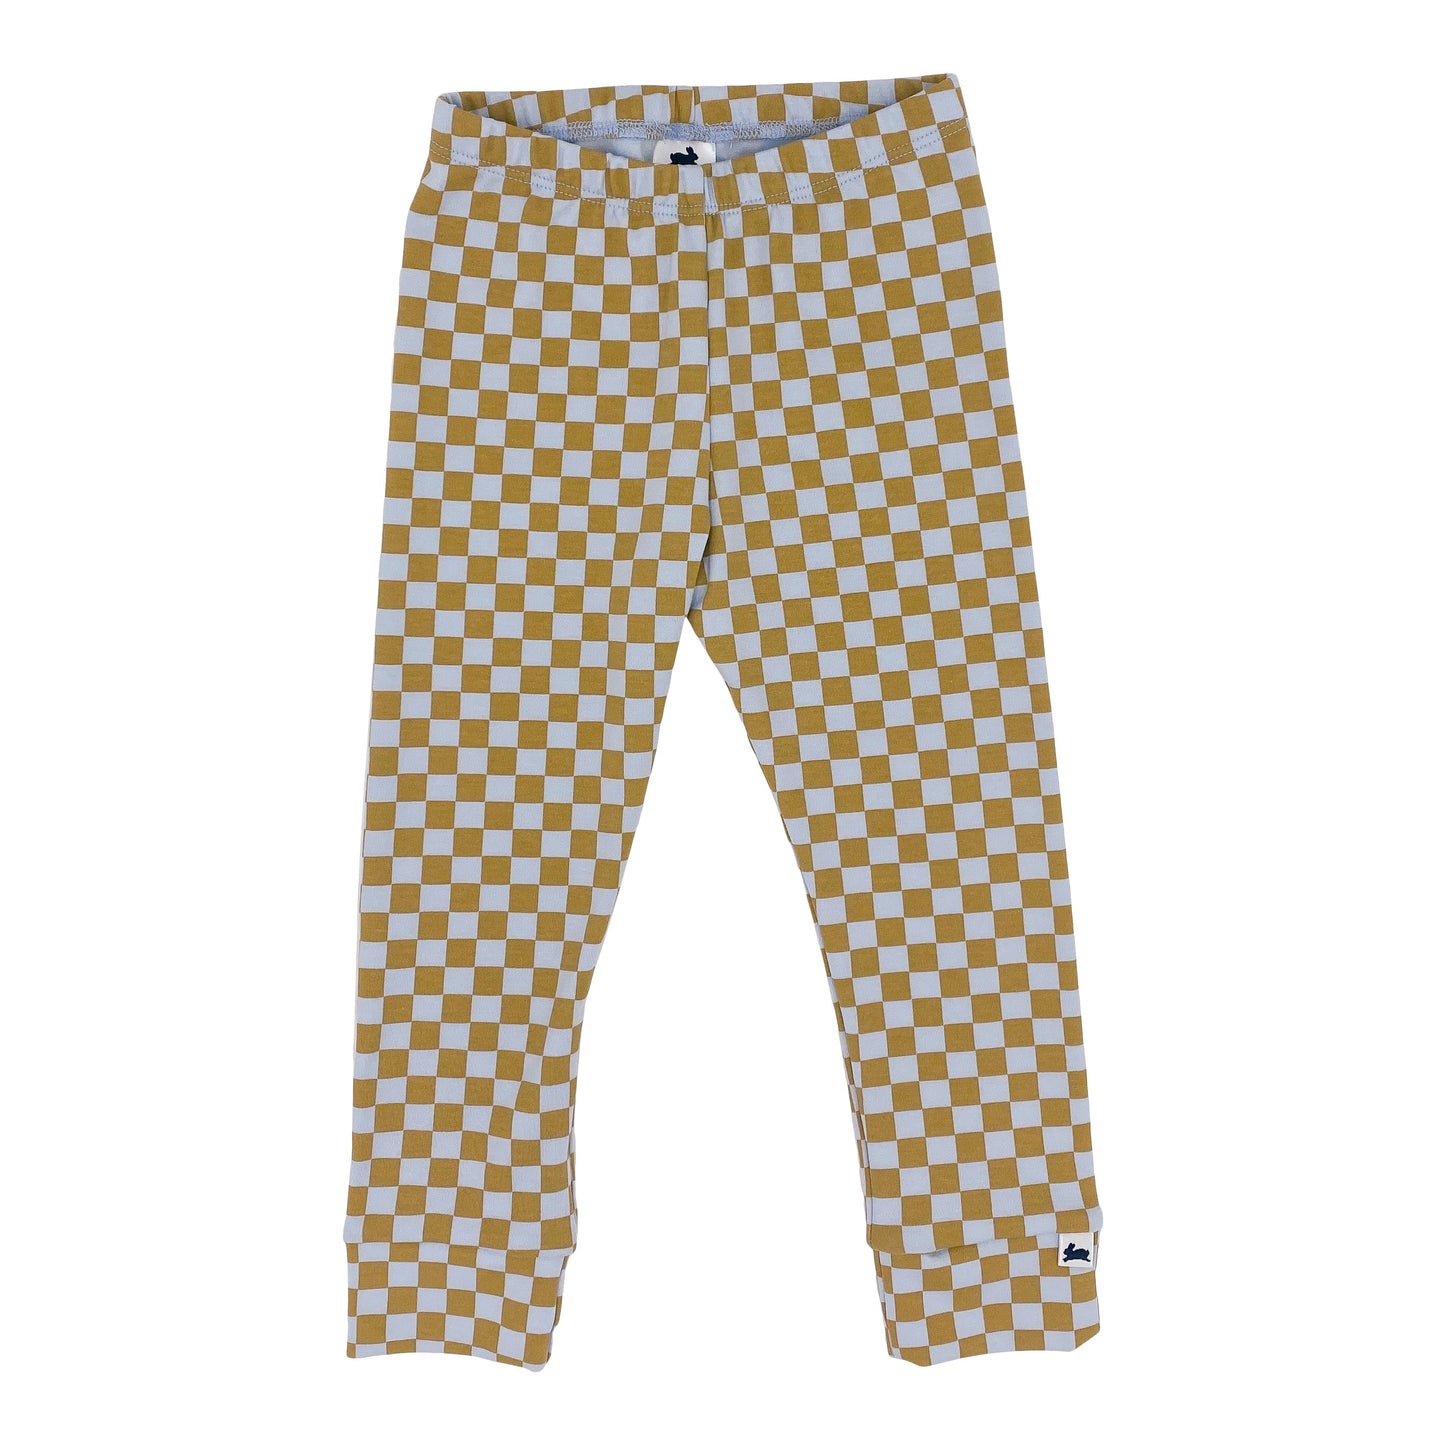 Baby/kid’s/youth Leggings | Blue Checkers Leggings Bamboo/cotton 1